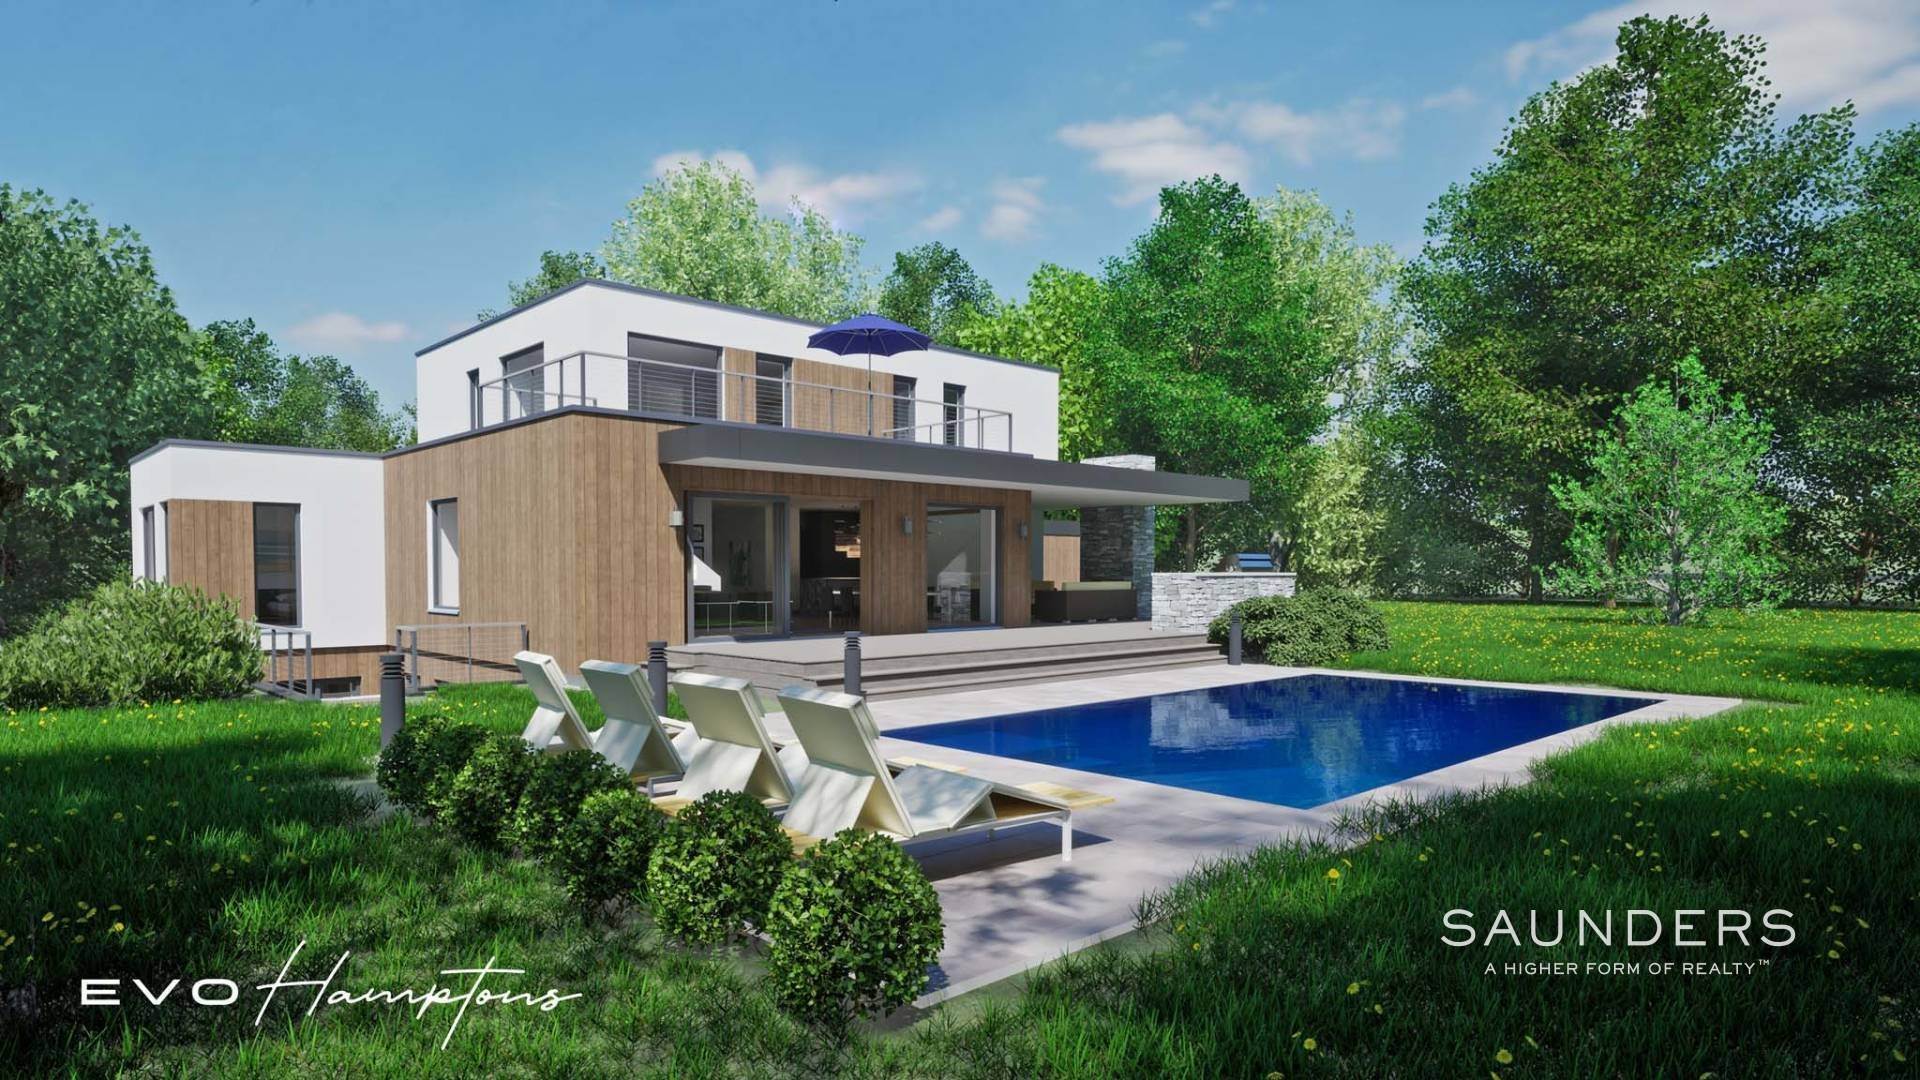 Single Family Homes for Sale at Brand New Private Paradise With Pool & Tennis 8 Holly Place, Lot 3, Springs, East Hampton, NY 11937